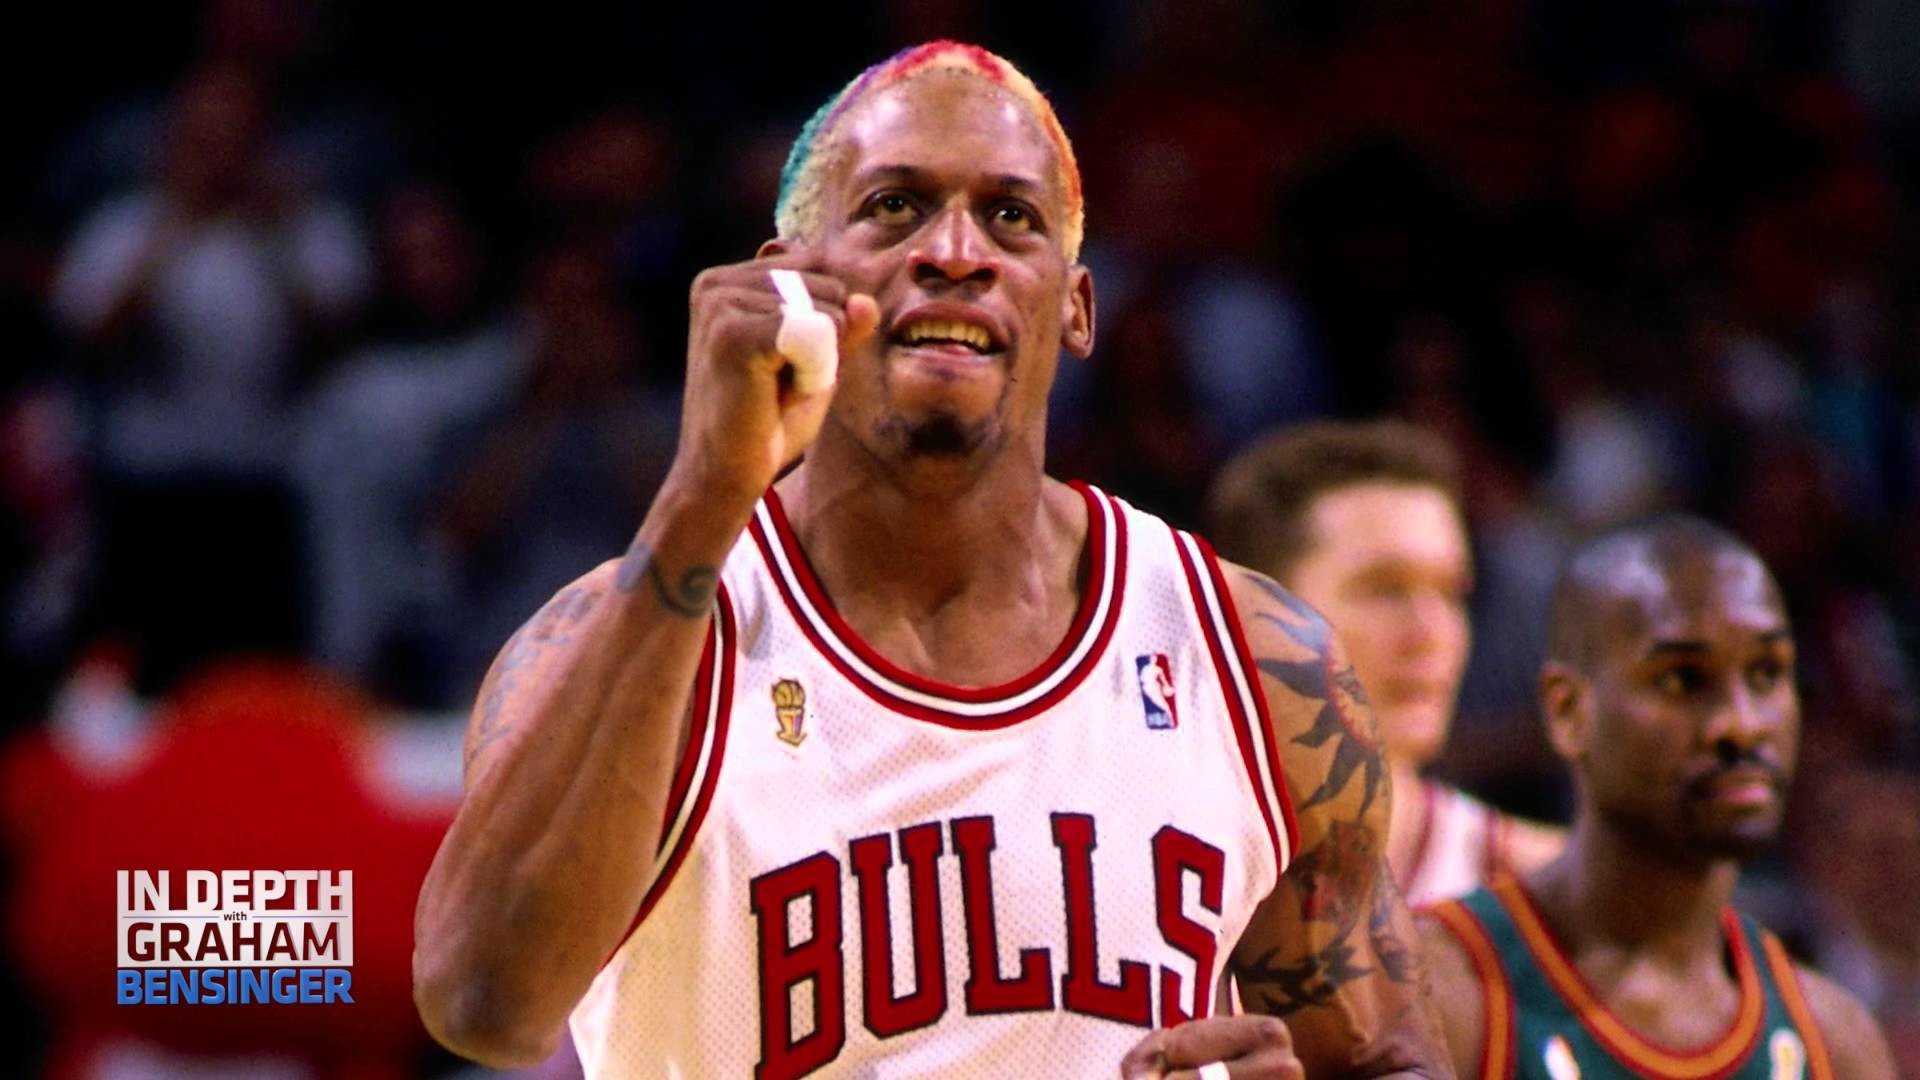 Dennis Rodman Wallpapers High Resolution And Quality - Dennis Rodman Wallpaper Hd - HD Wallpaper 